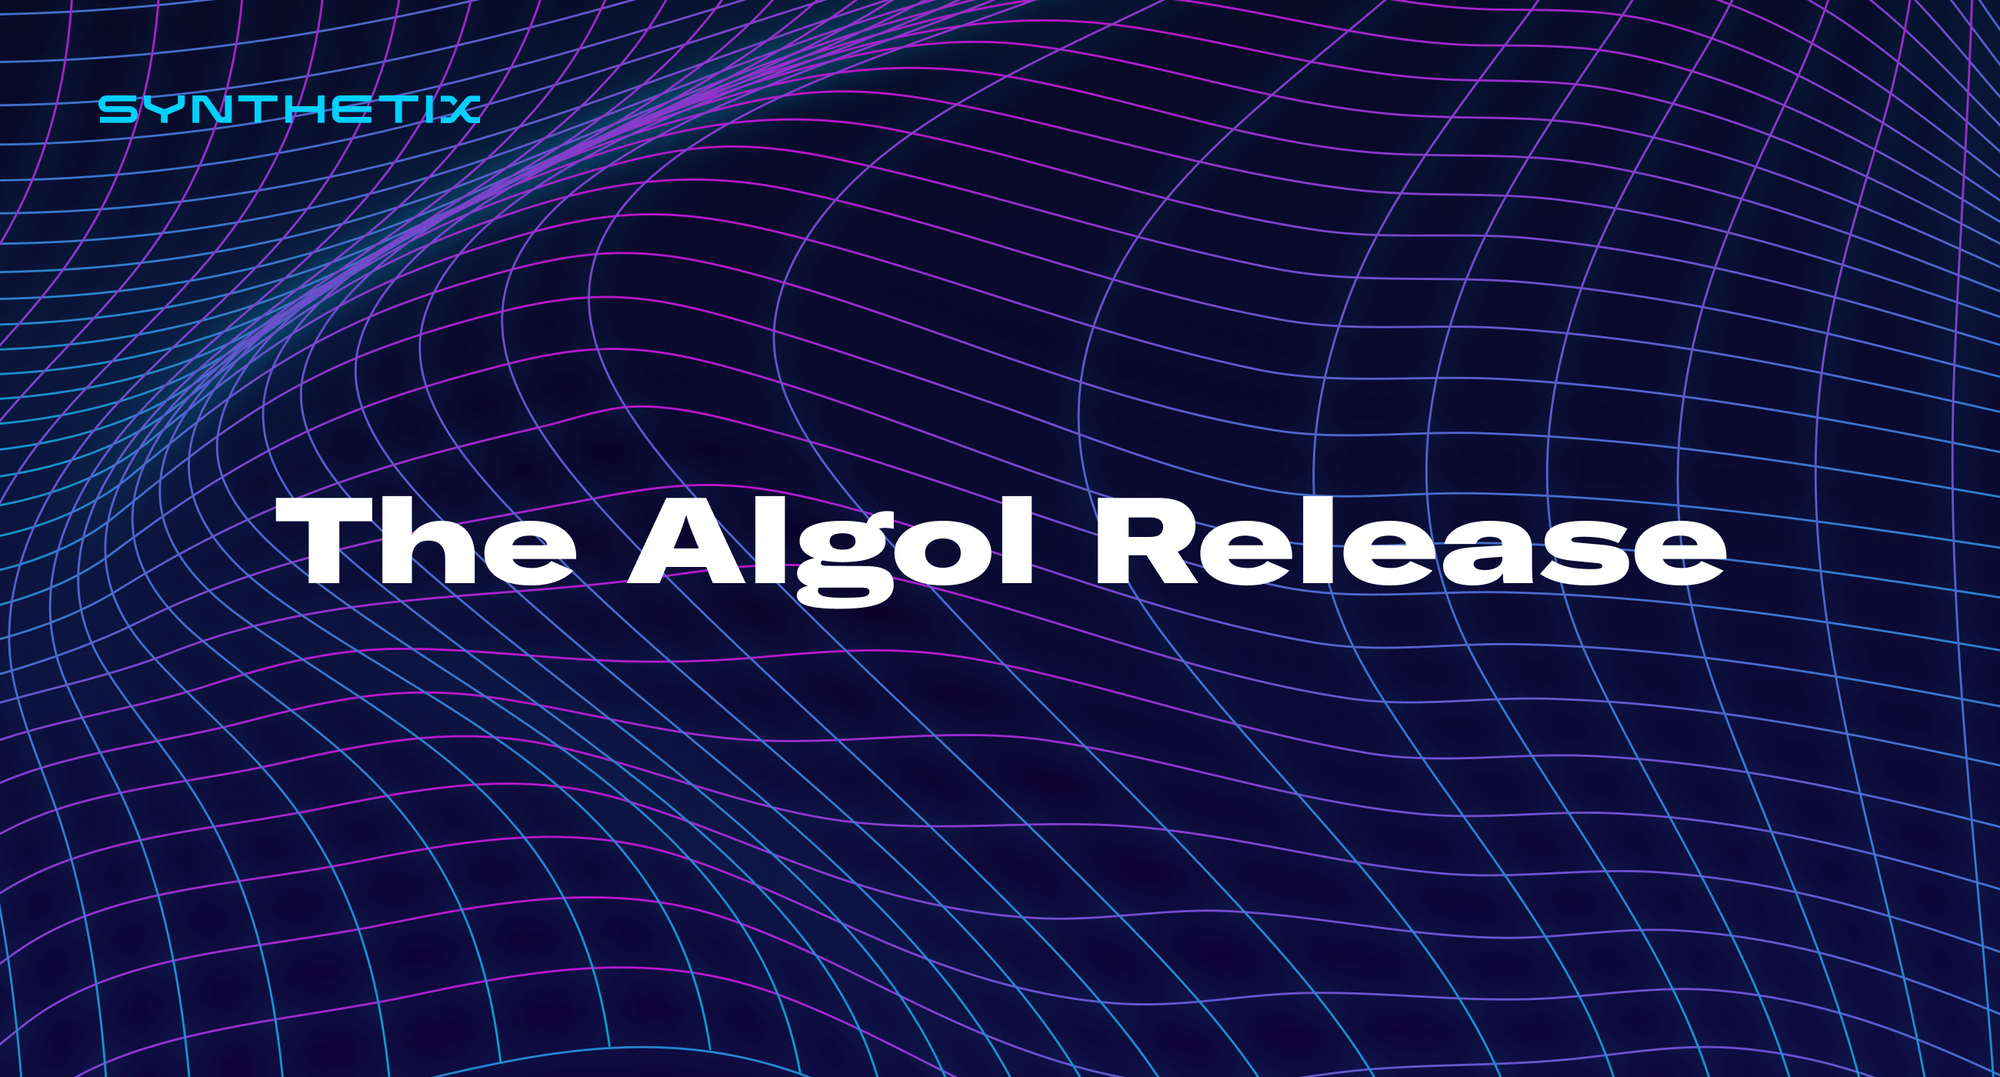 The Algol Release